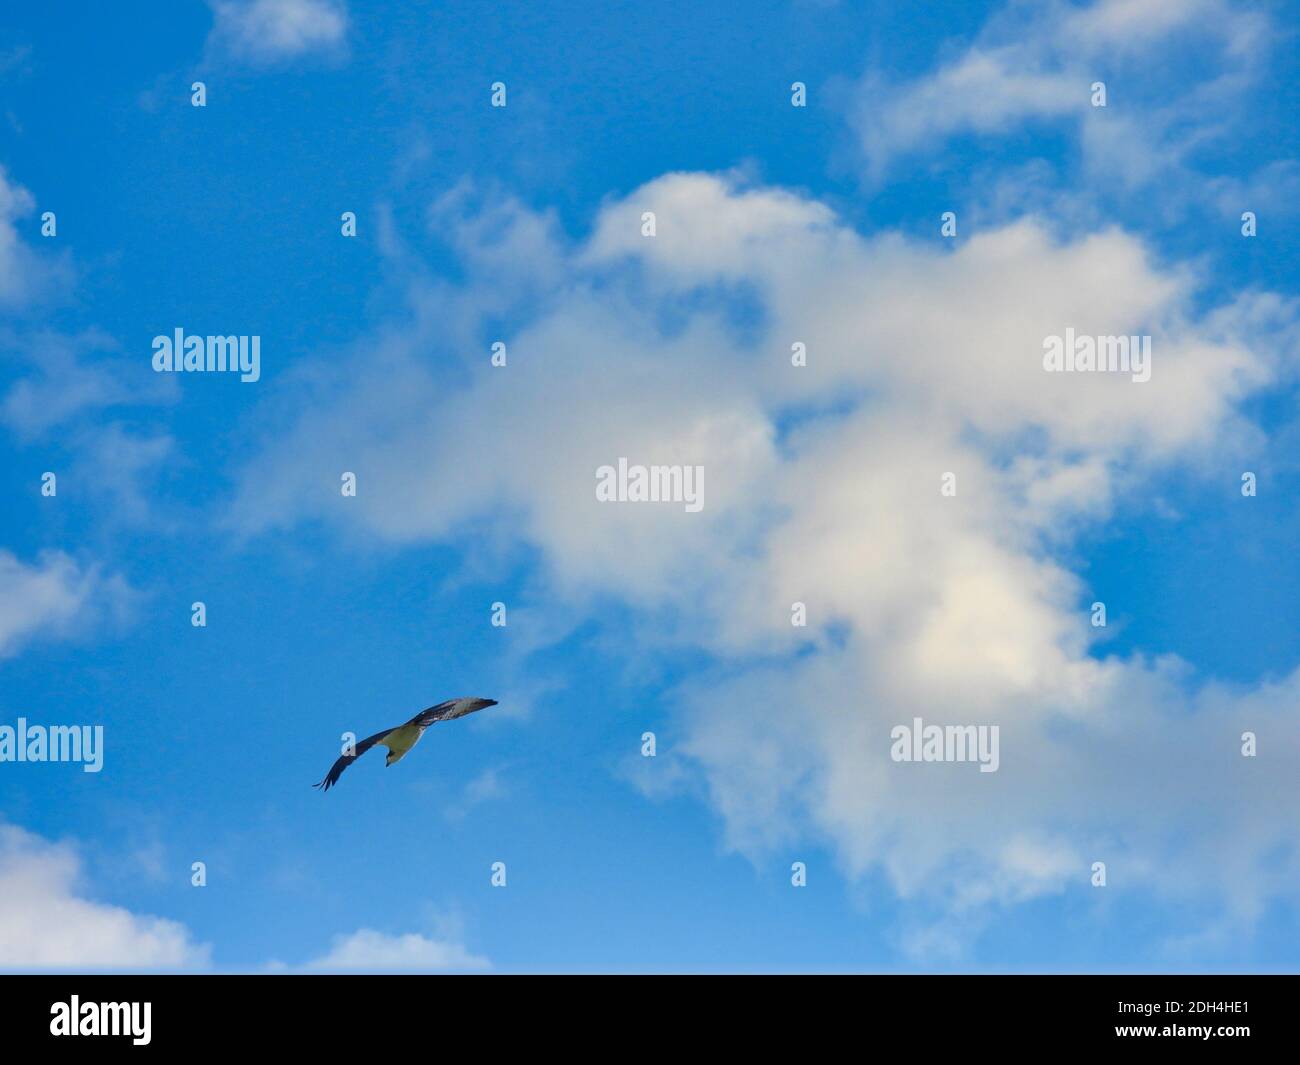 Osprey Bird of Prey Flying Through Bright Blue Sky with Fluffy Clouds with Full Wing Span Hunting on a Summer Day Stock Photo